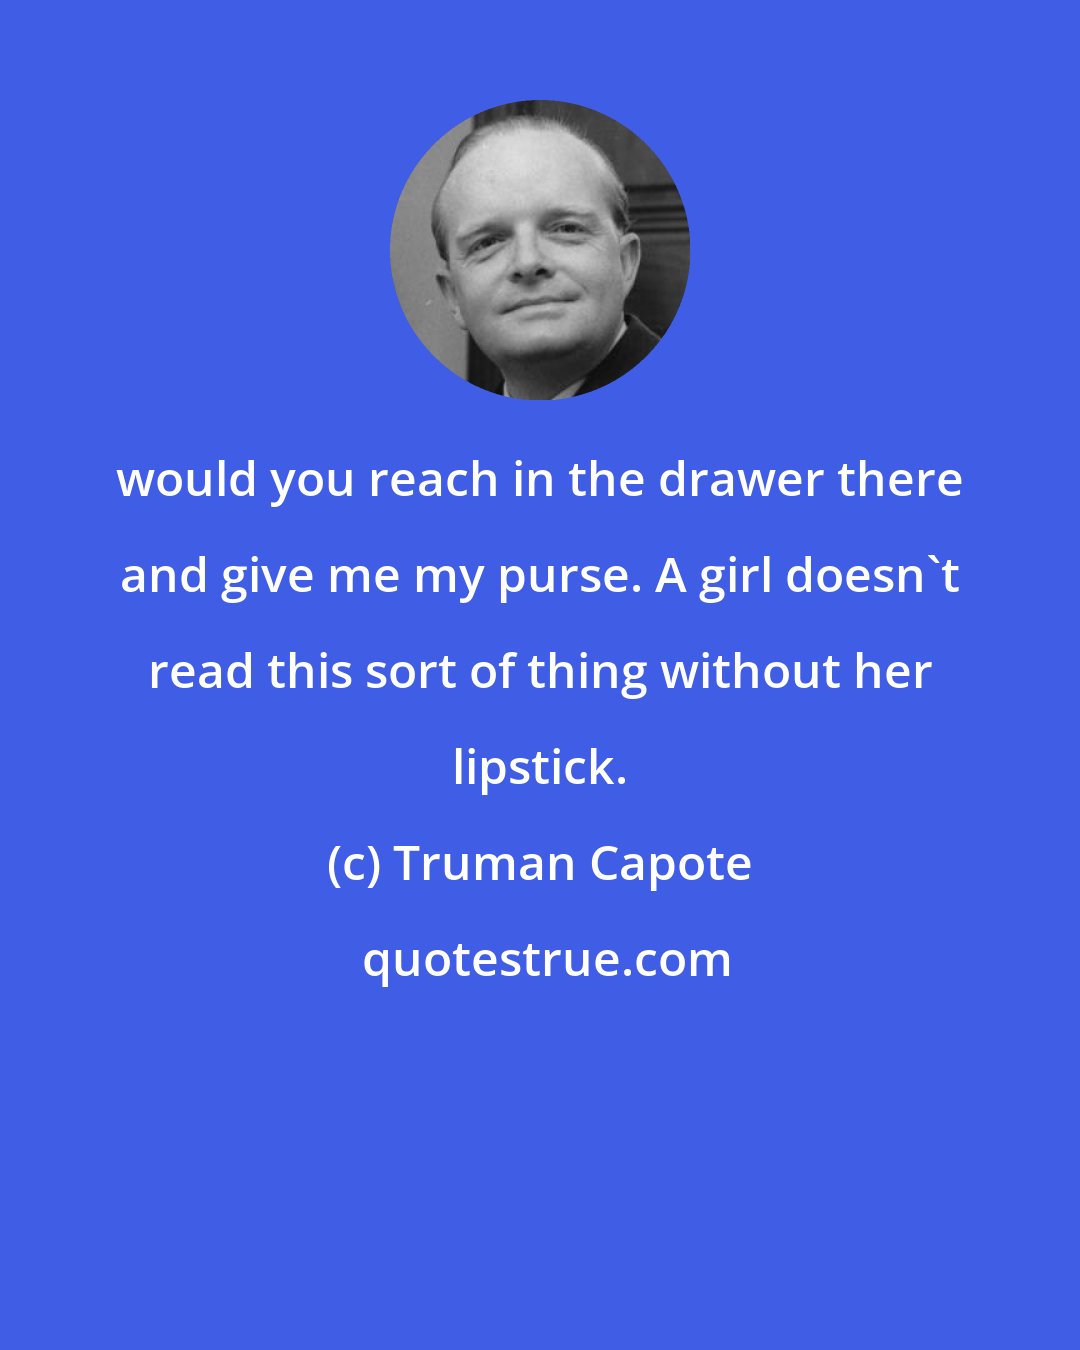 Truman Capote: would you reach in the drawer there and give me my purse. A girl doesn't read this sort of thing without her lipstick.